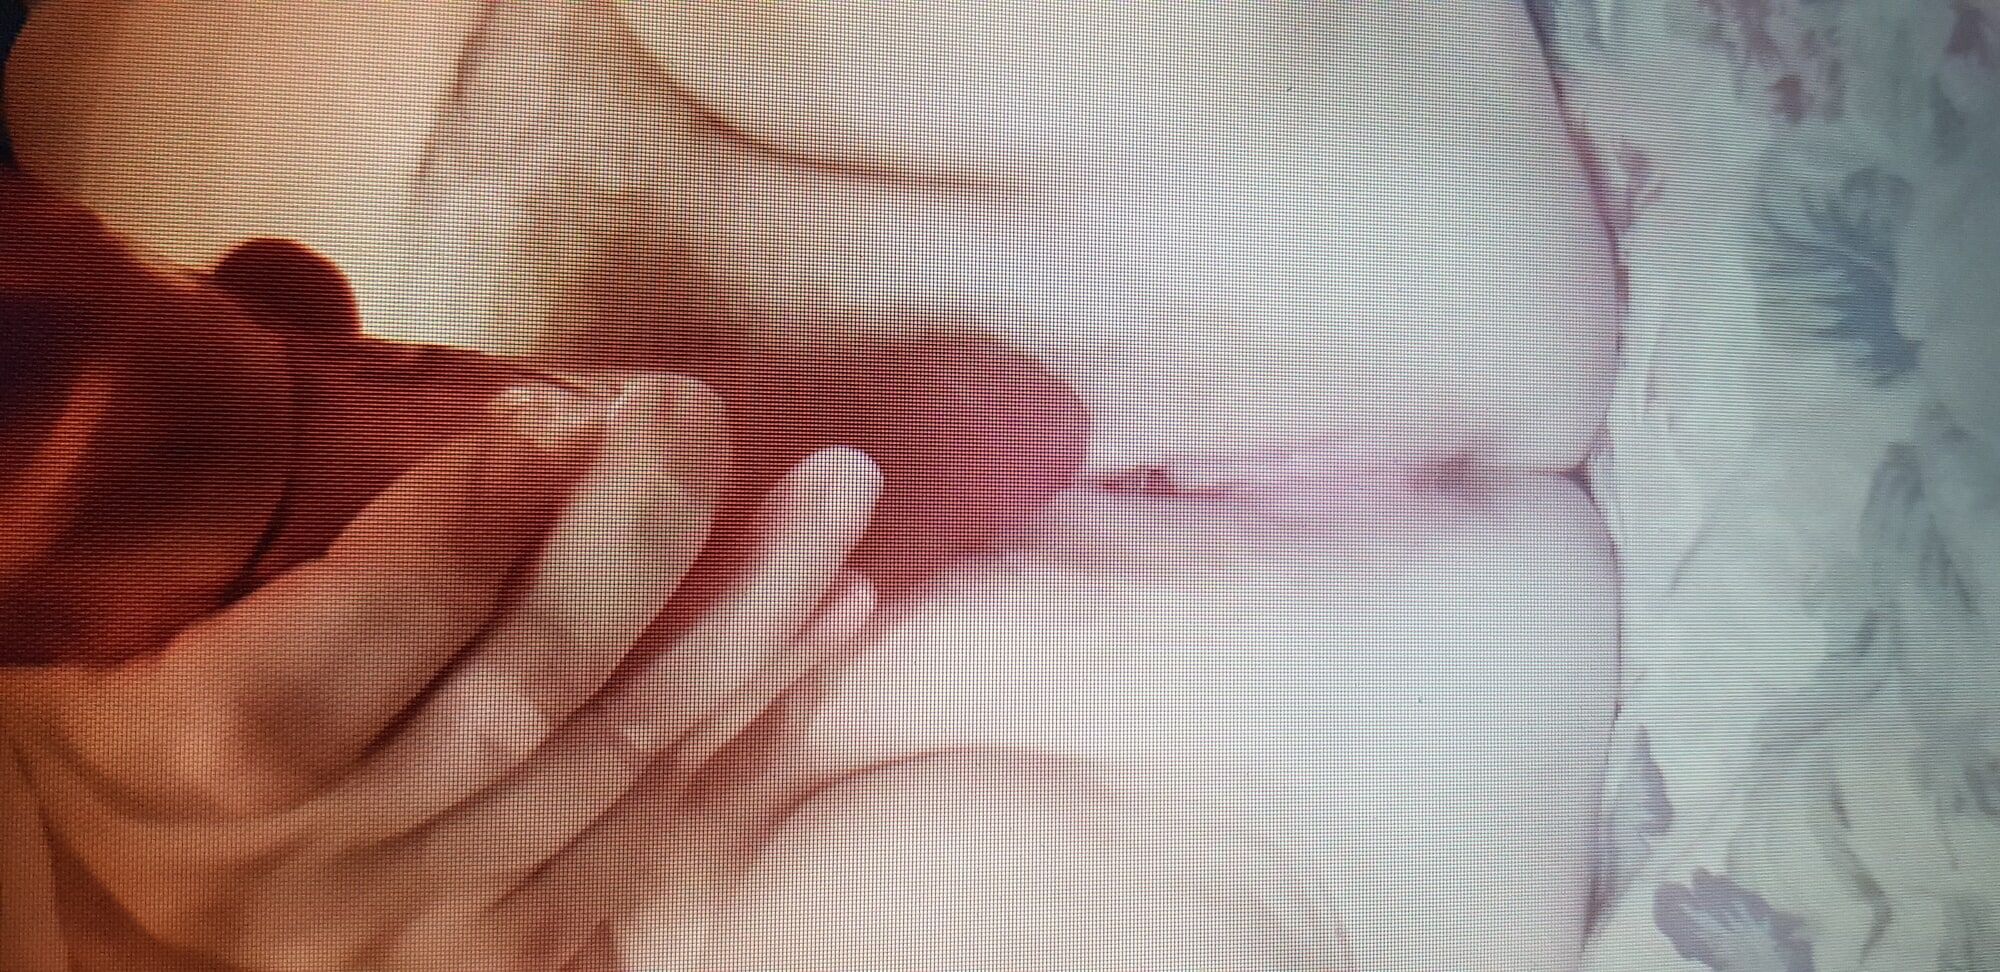 new pictures of my husband's little cock, it's so nice to su #8